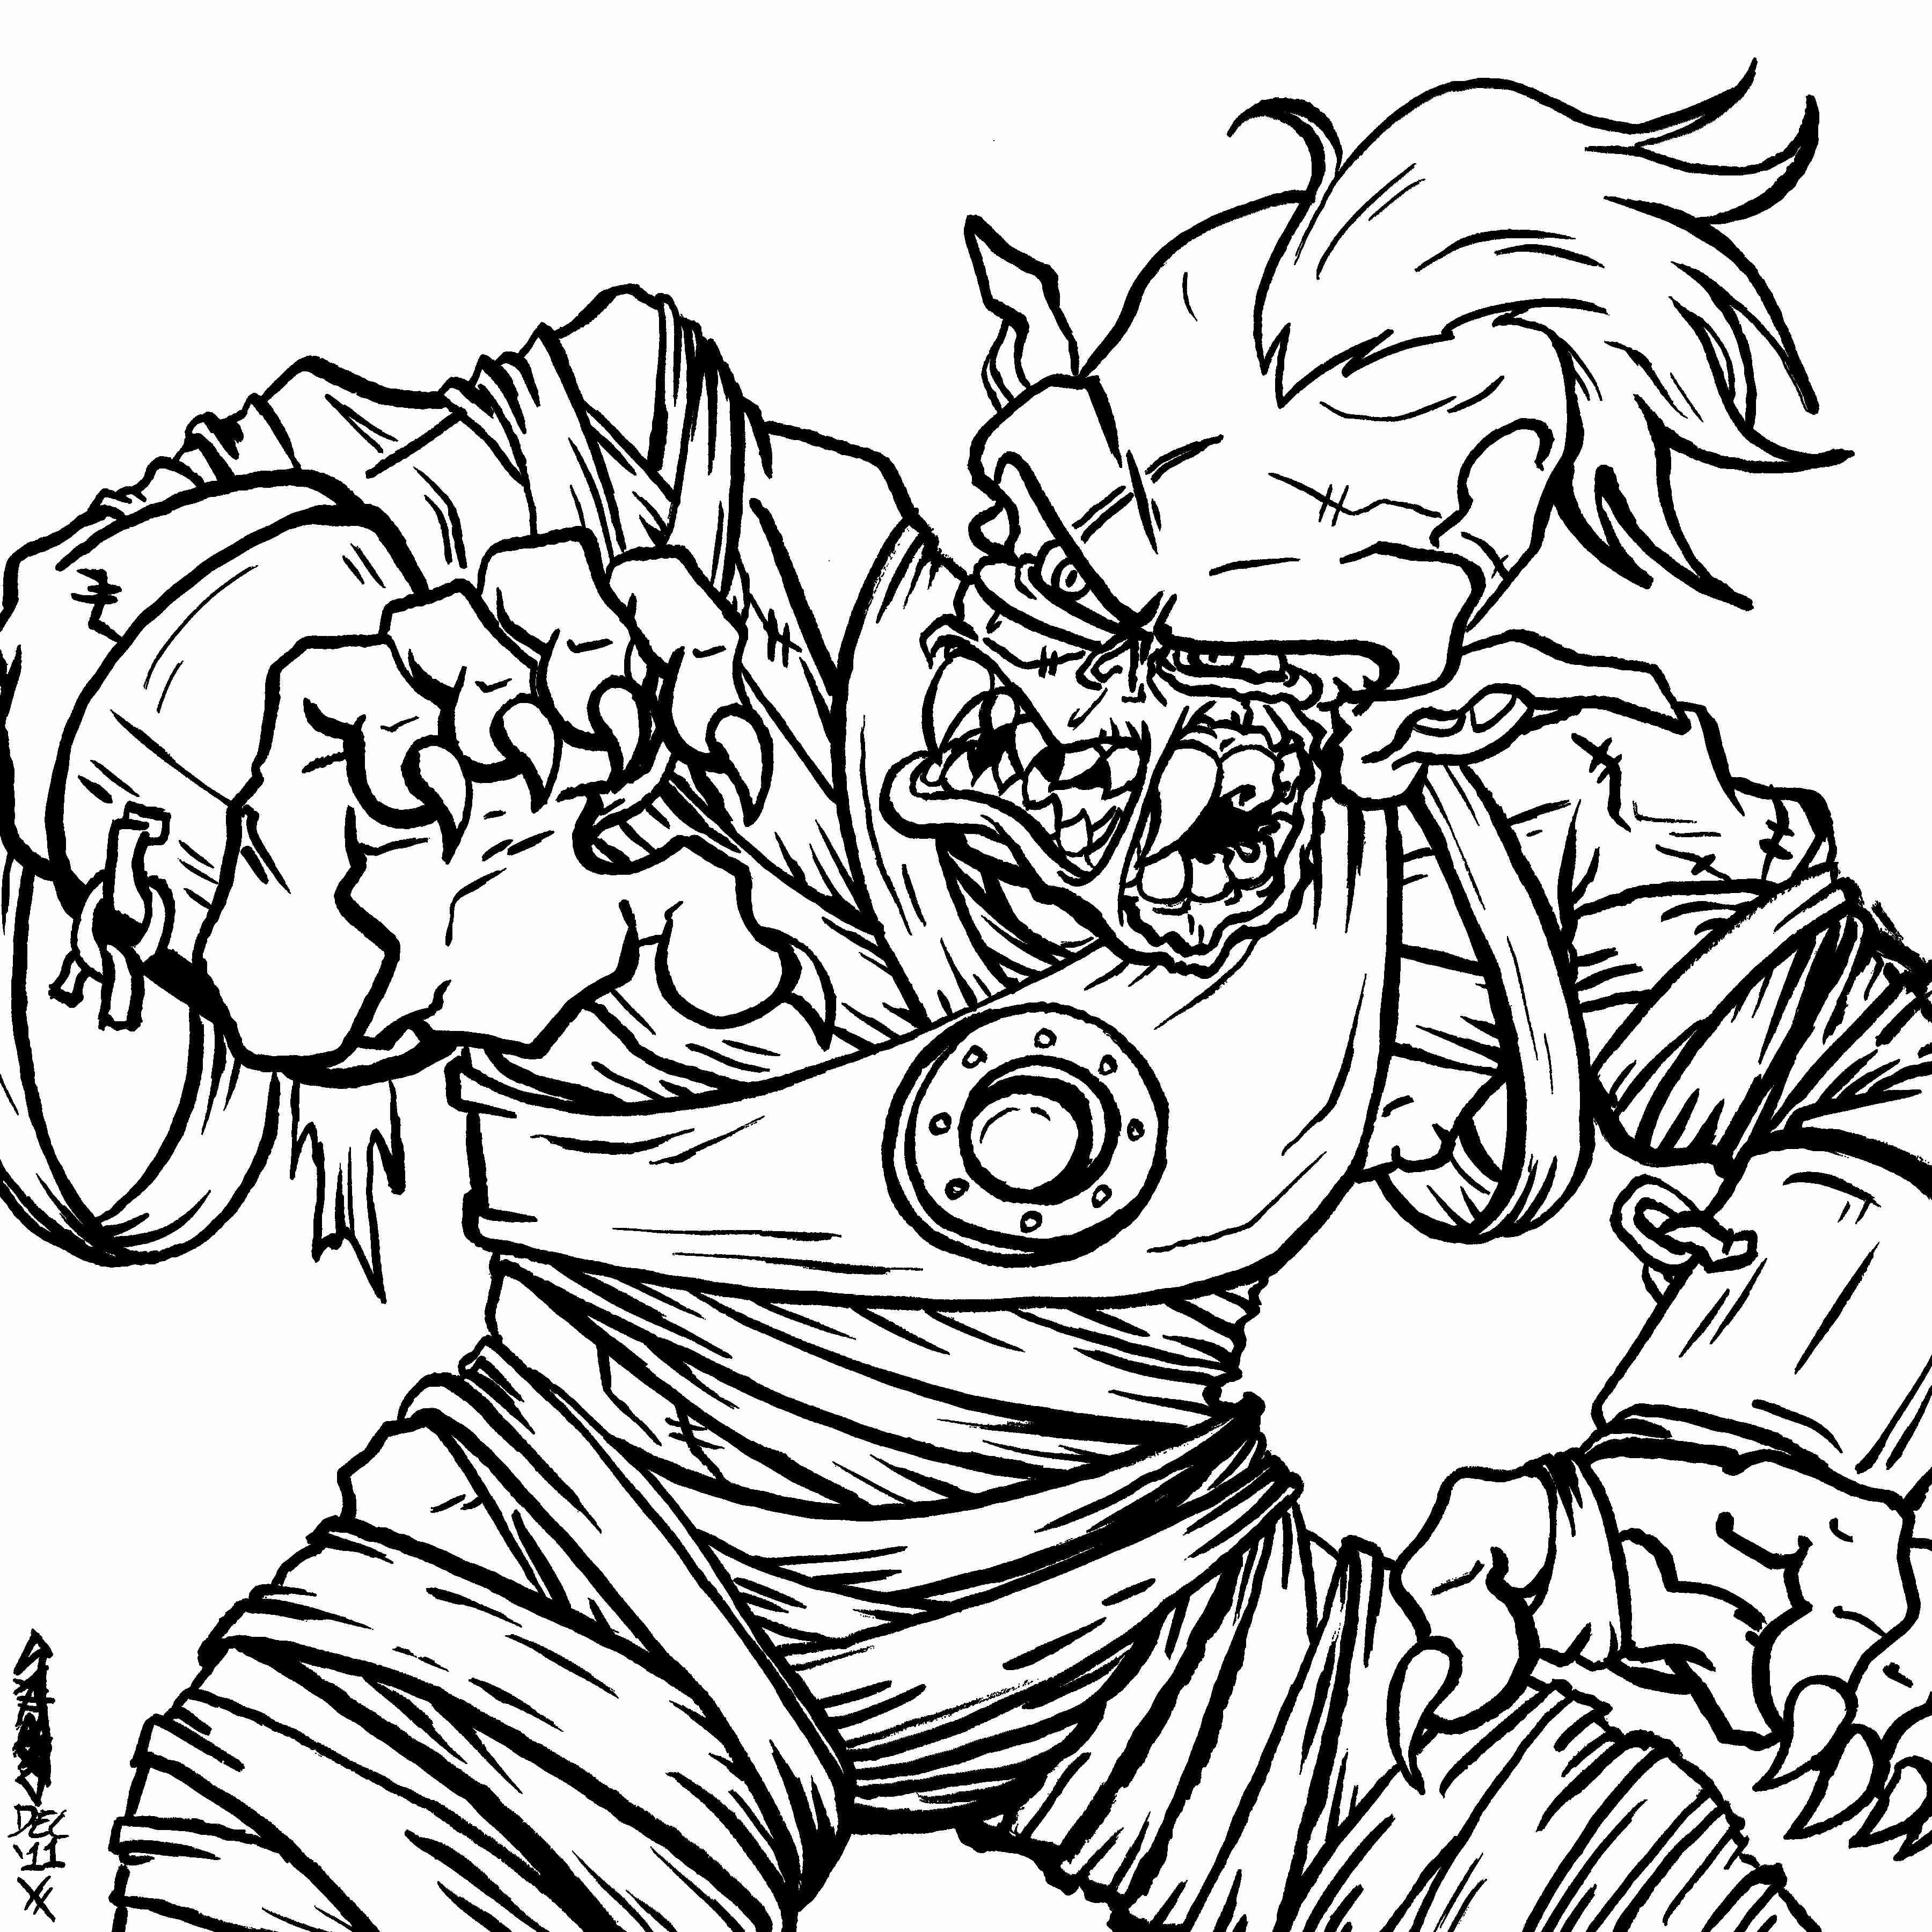 Printable Disney Zombies Coloring Pages Coloring Pages for Kids